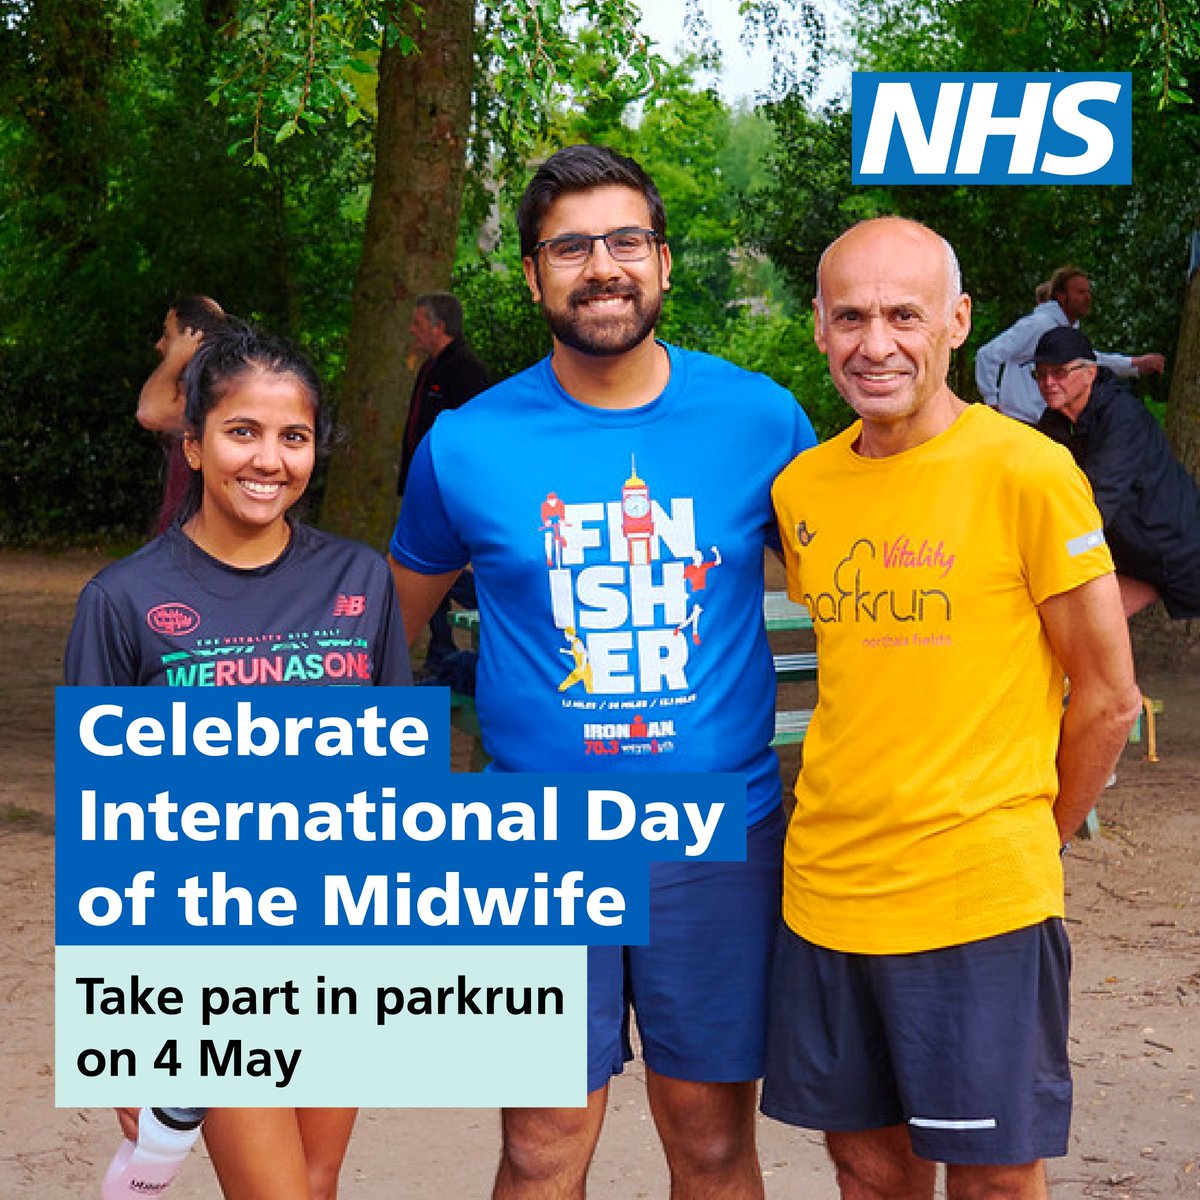 Help support International Day of the Midwife Take part in a local @parkrunUK event on 4 May to mark International Day of the Midwife You can walk, jog, run or volunteer as we recognise and thank our #teamCMidO midwives parkrun.org.uk/register/